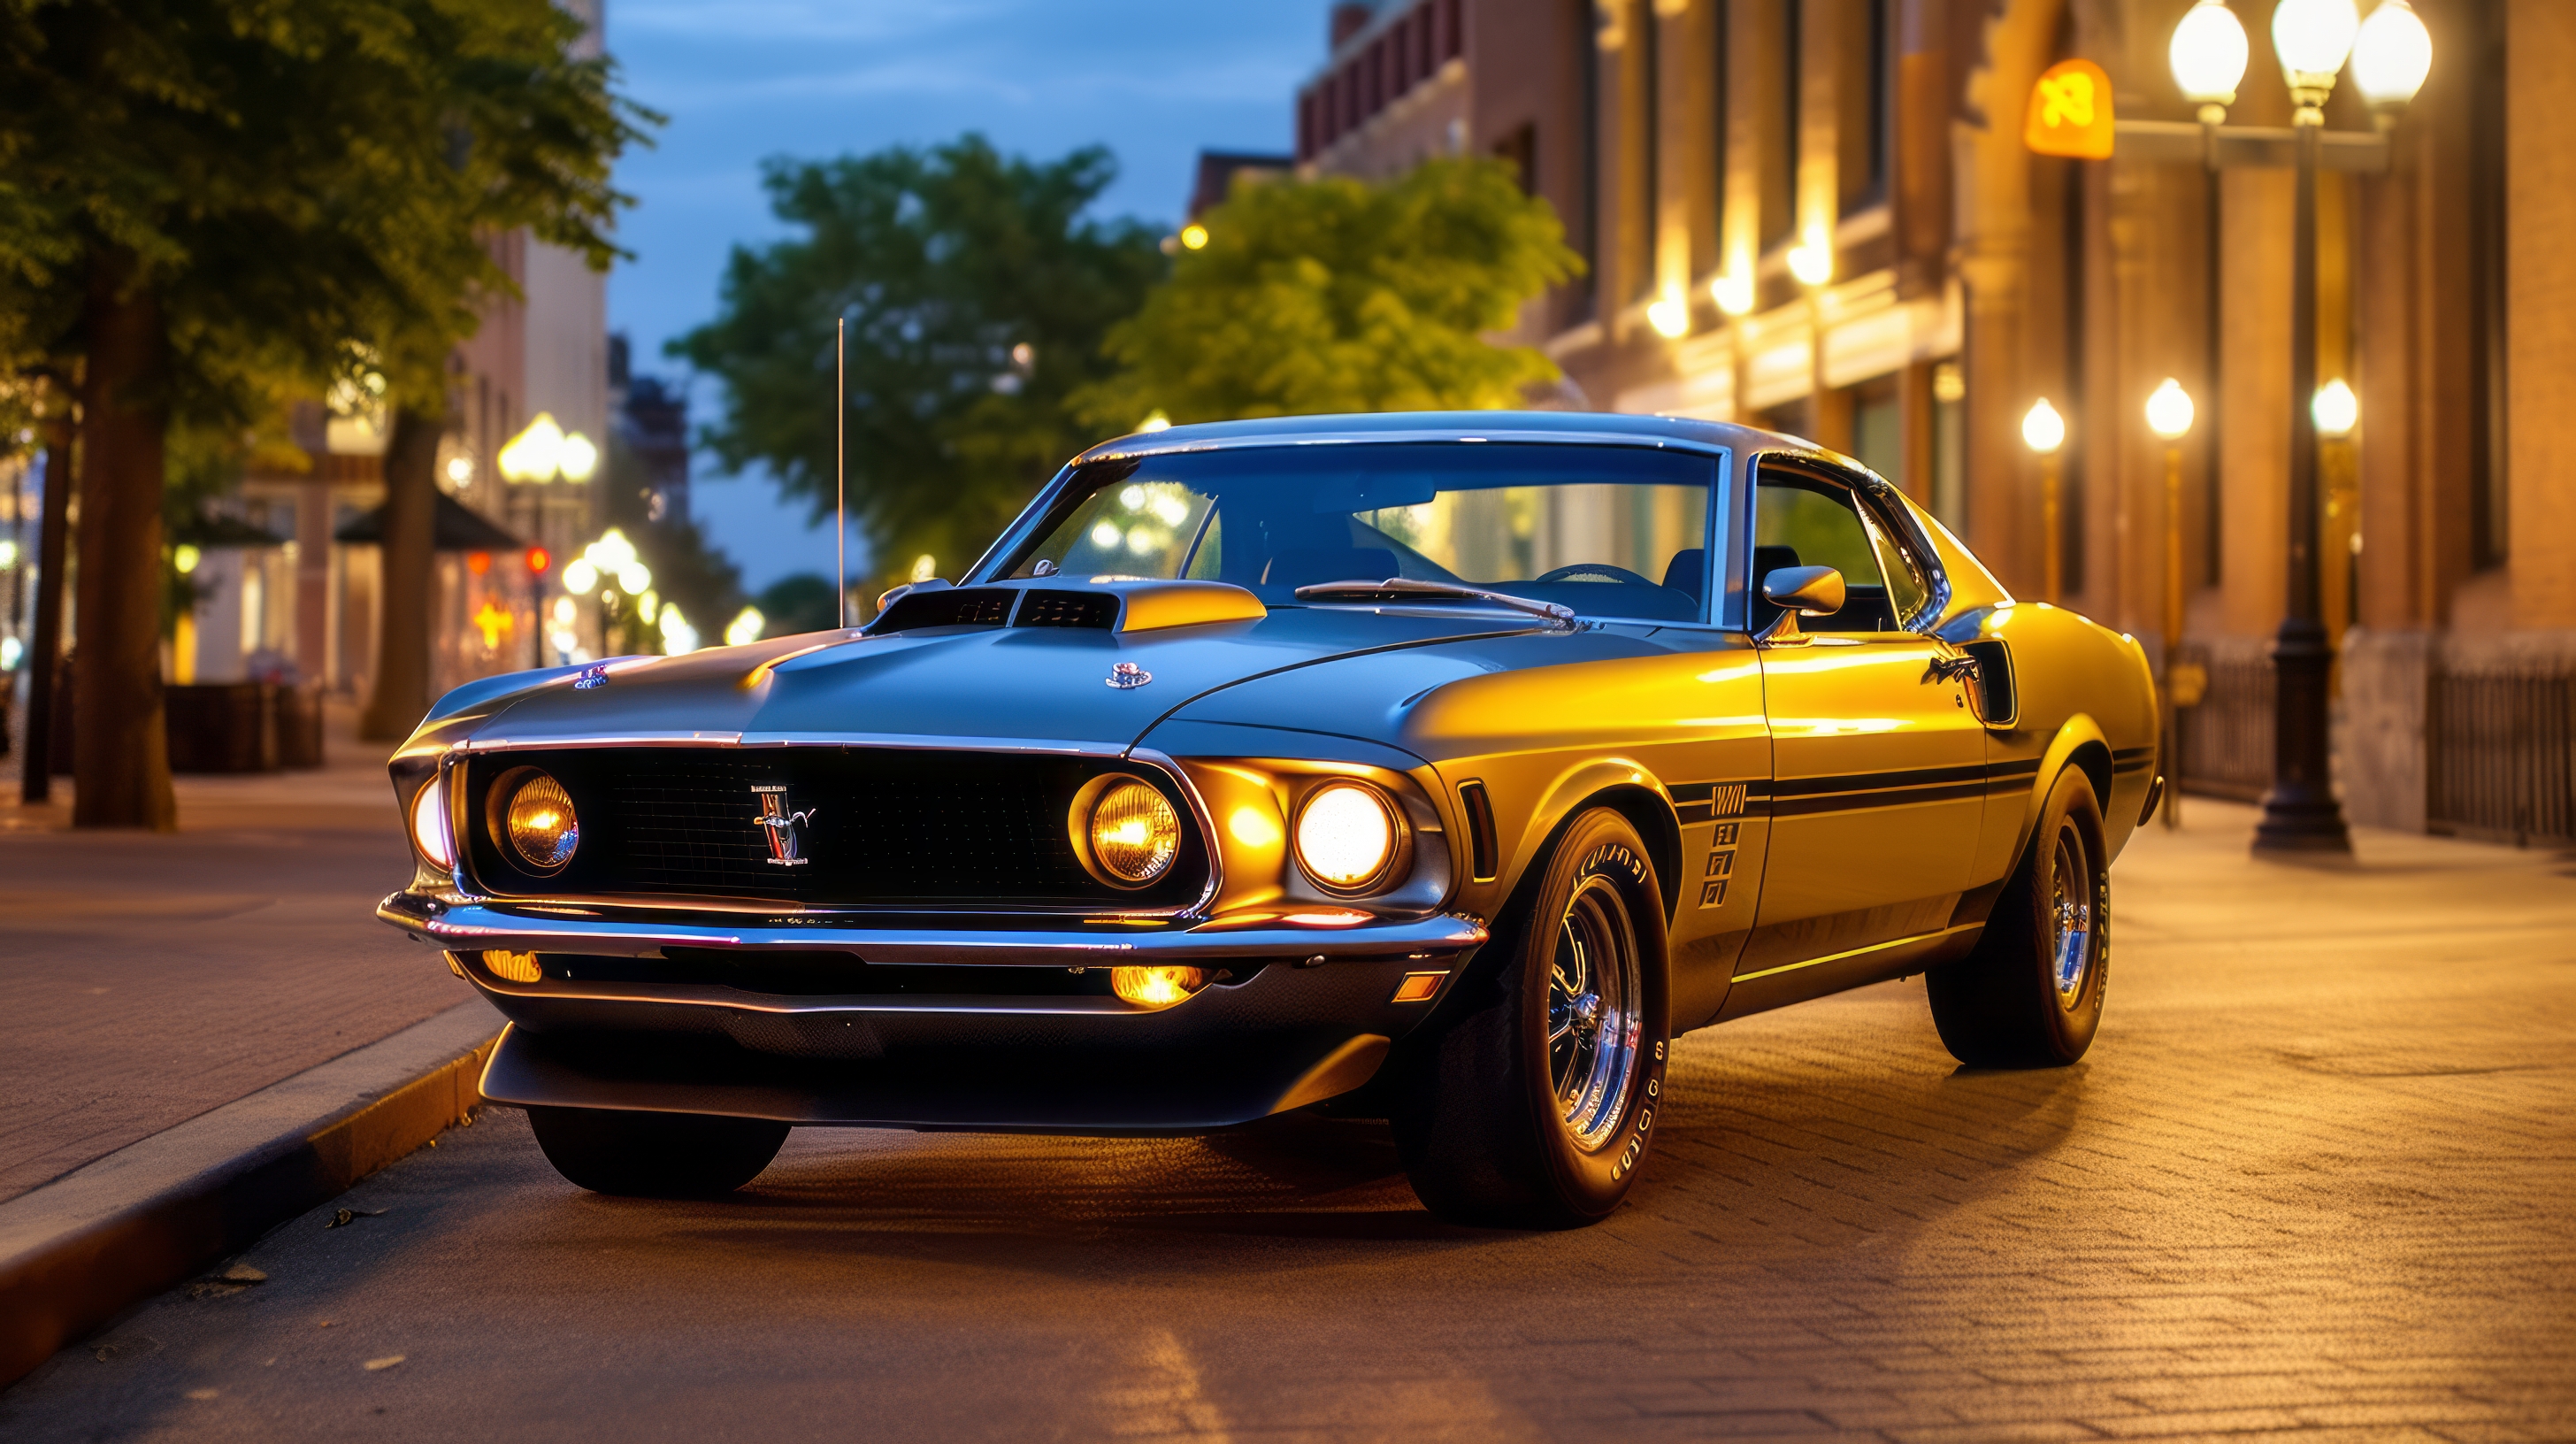 General 2912x1632 AI art city muscle cars ford mustang 1969 street Blue hour yellow blue frontal view car headlights trees street light building